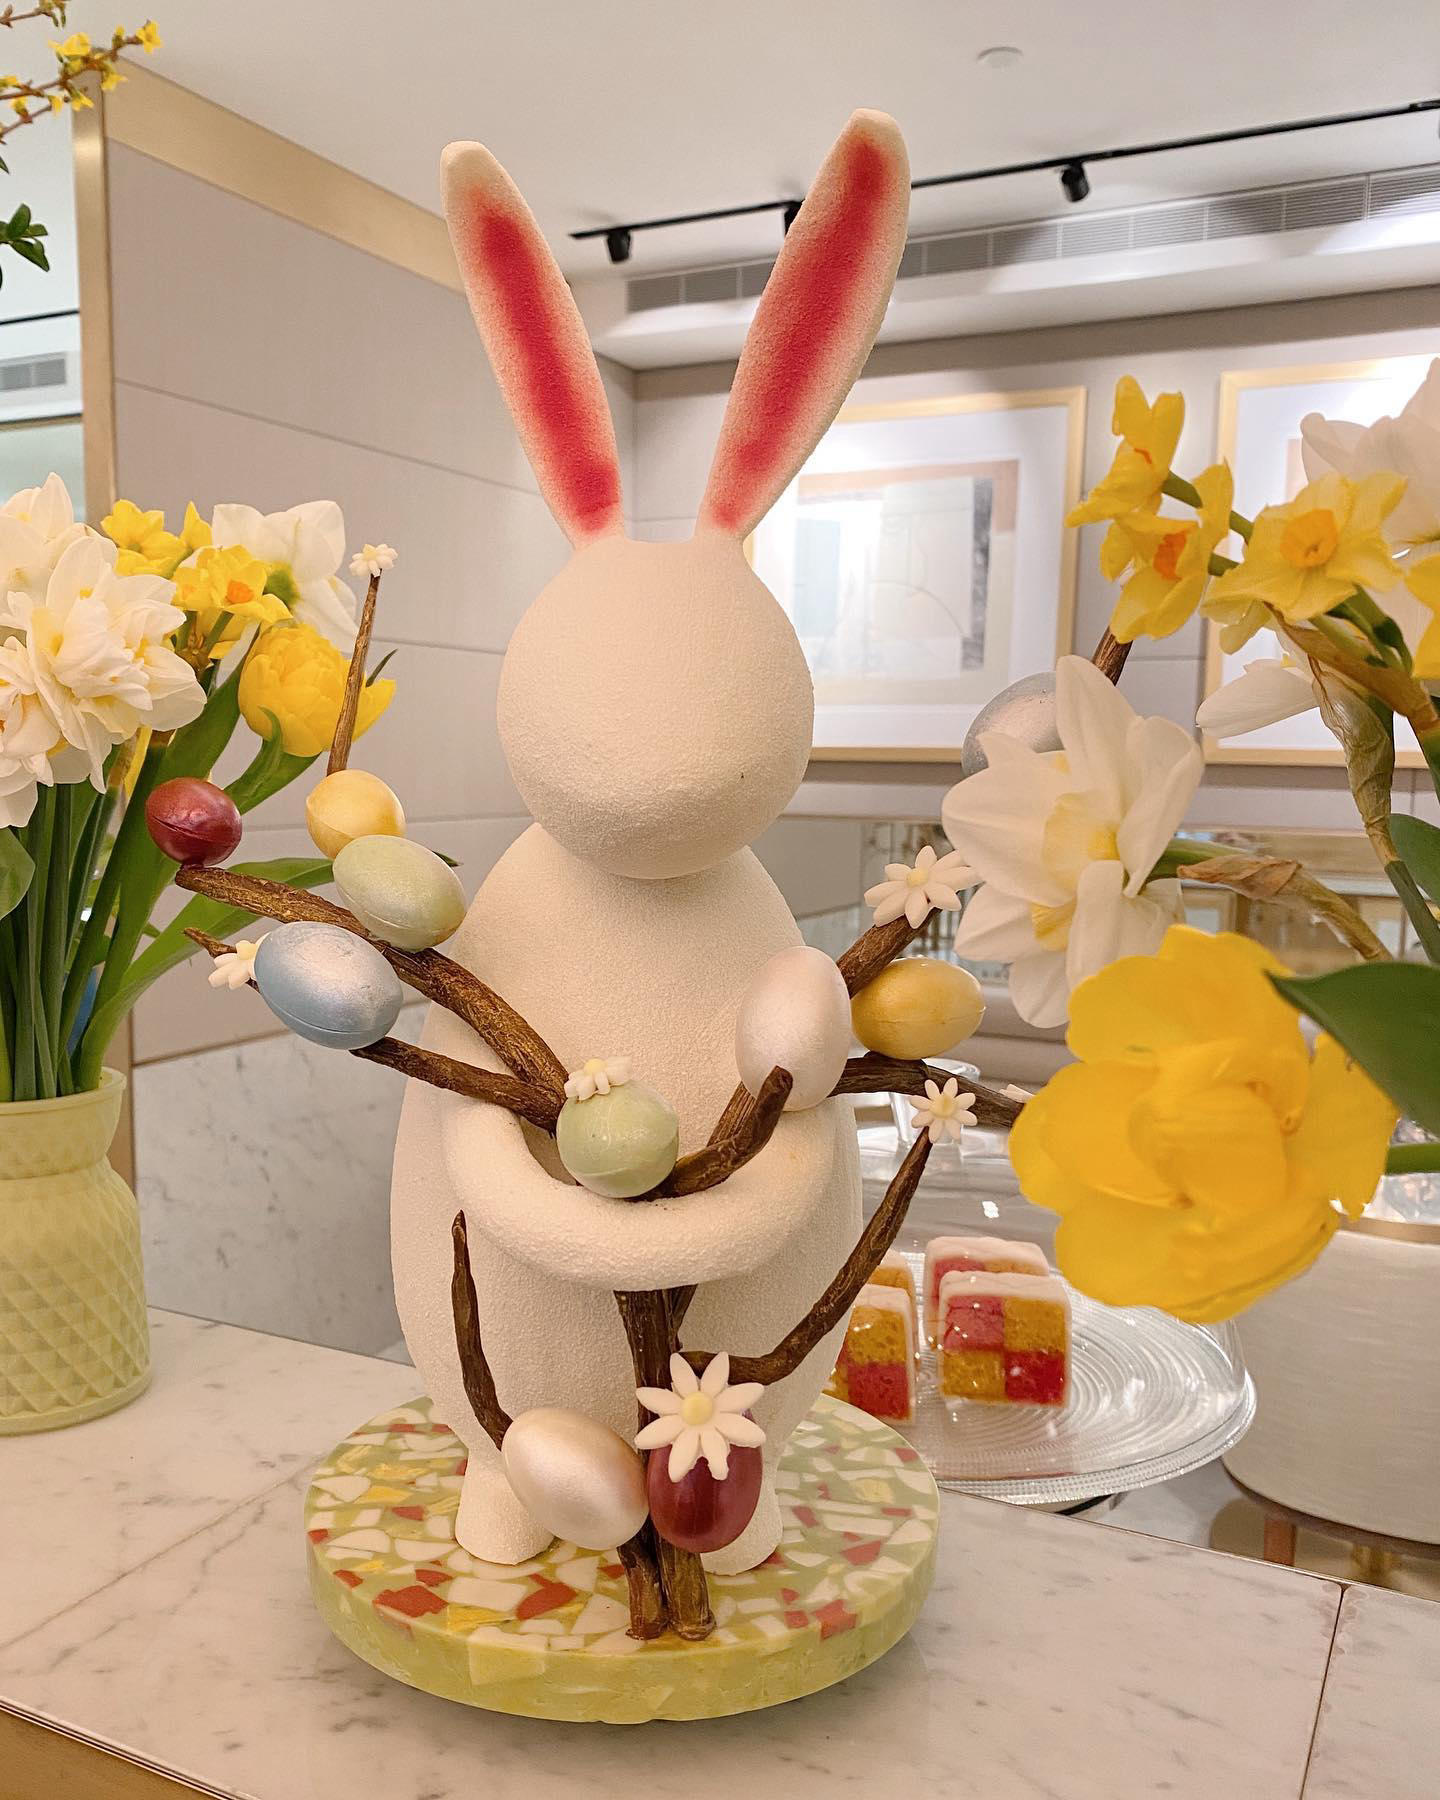 We’ve had a special visit from the Easter Bunny, just in time for the long bank holiday weekend